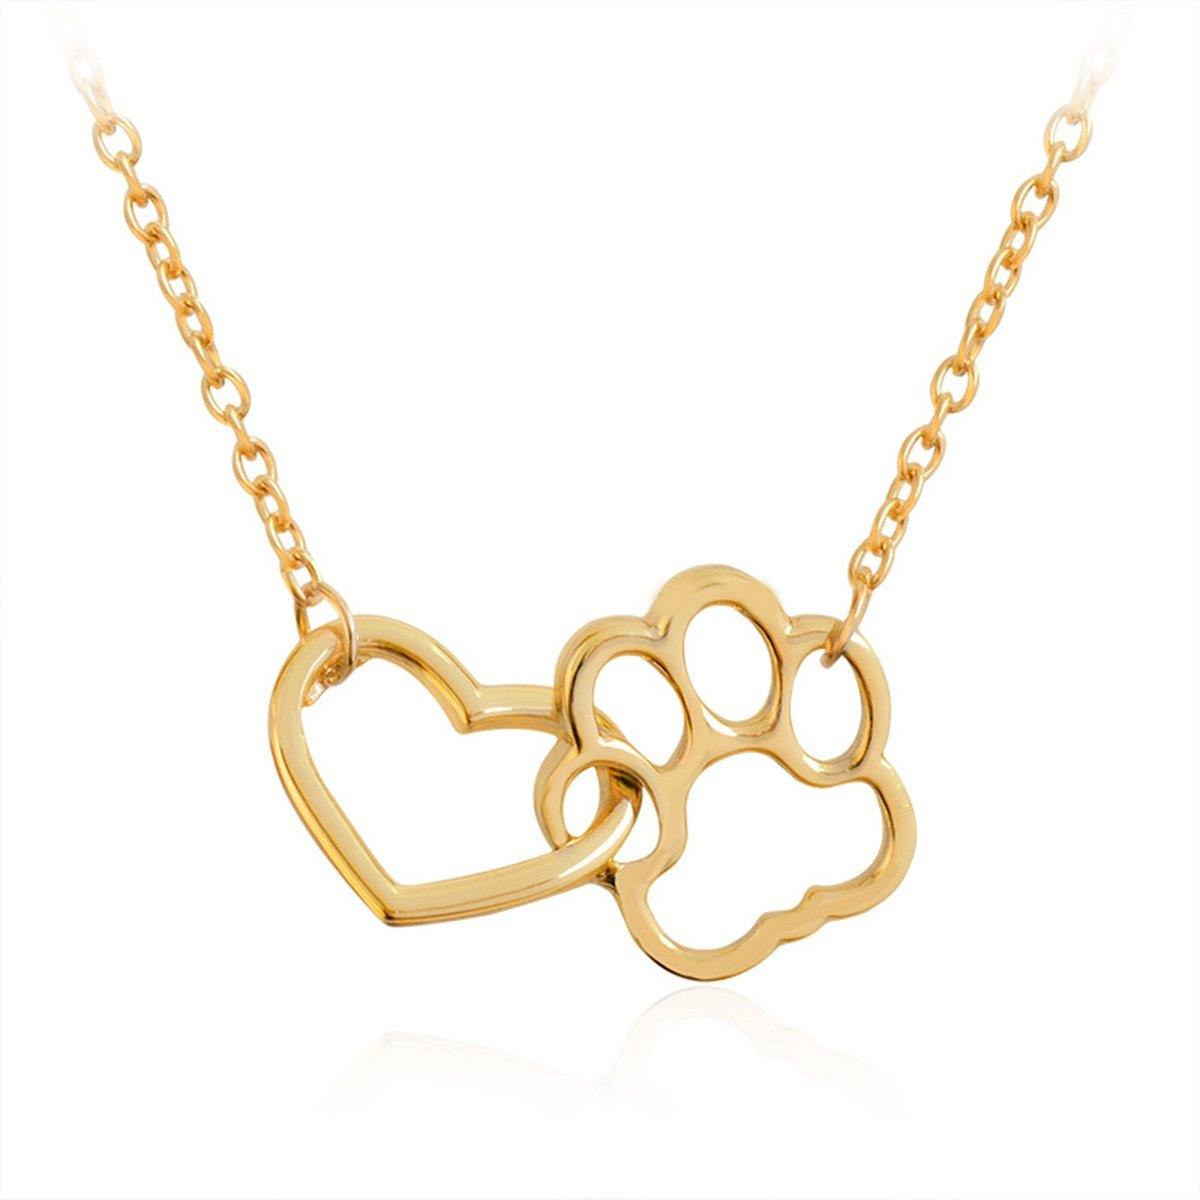 Double Paw Footprint Necklace